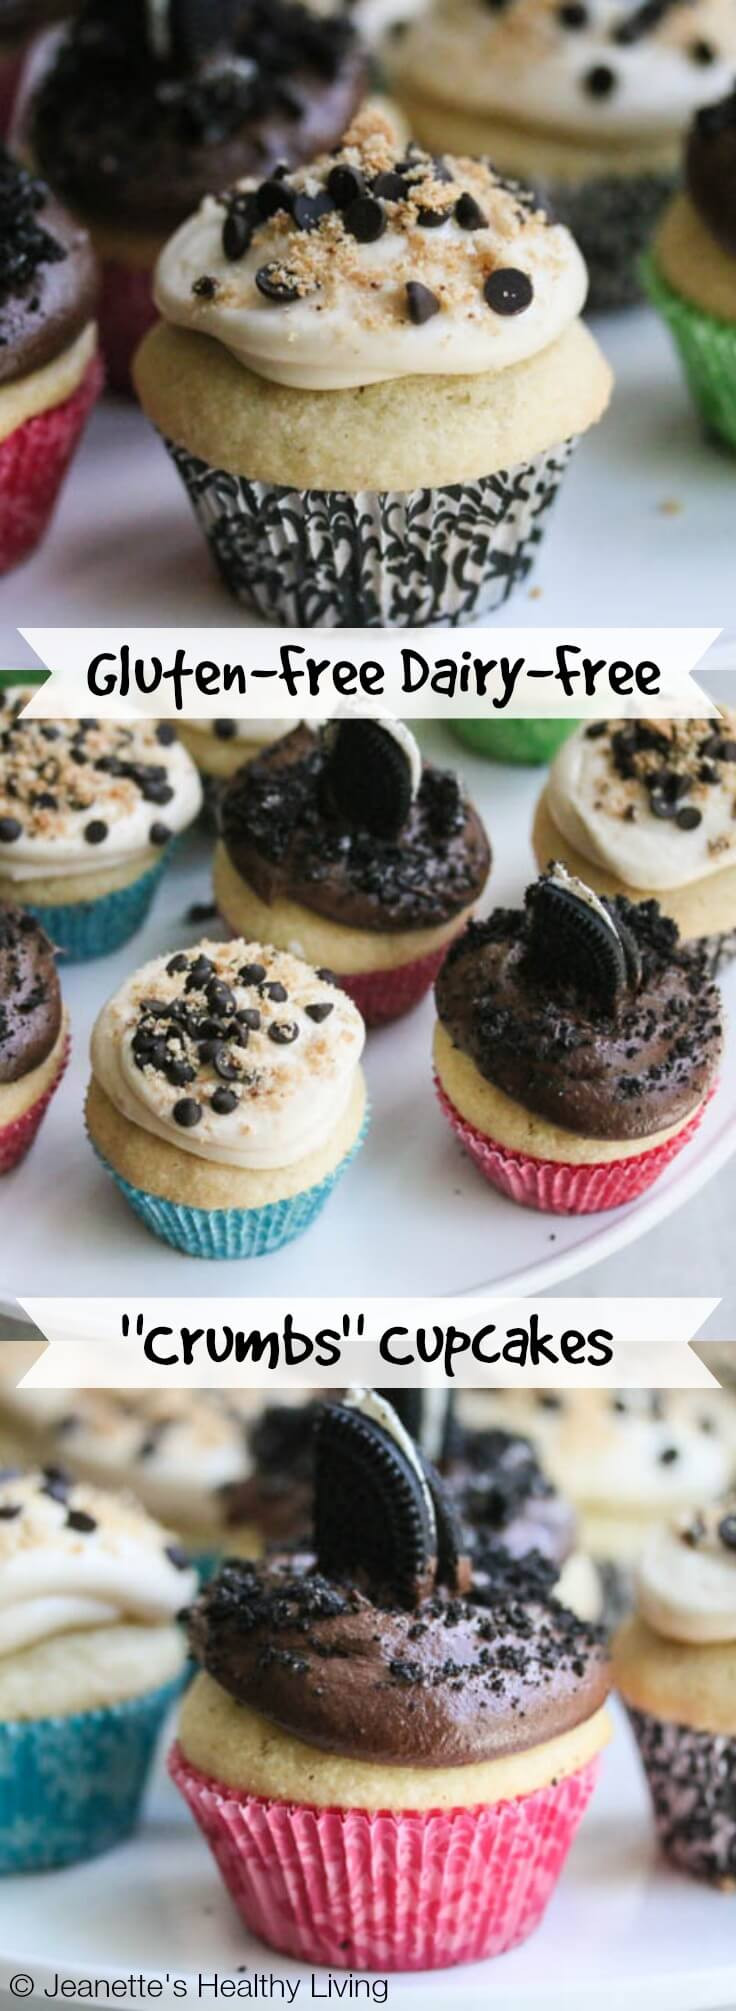 Dairy Free Cupcake Recipes
 Gluten Free Dairy Free "Crumbs" Cupcakes Recipe Jeanette